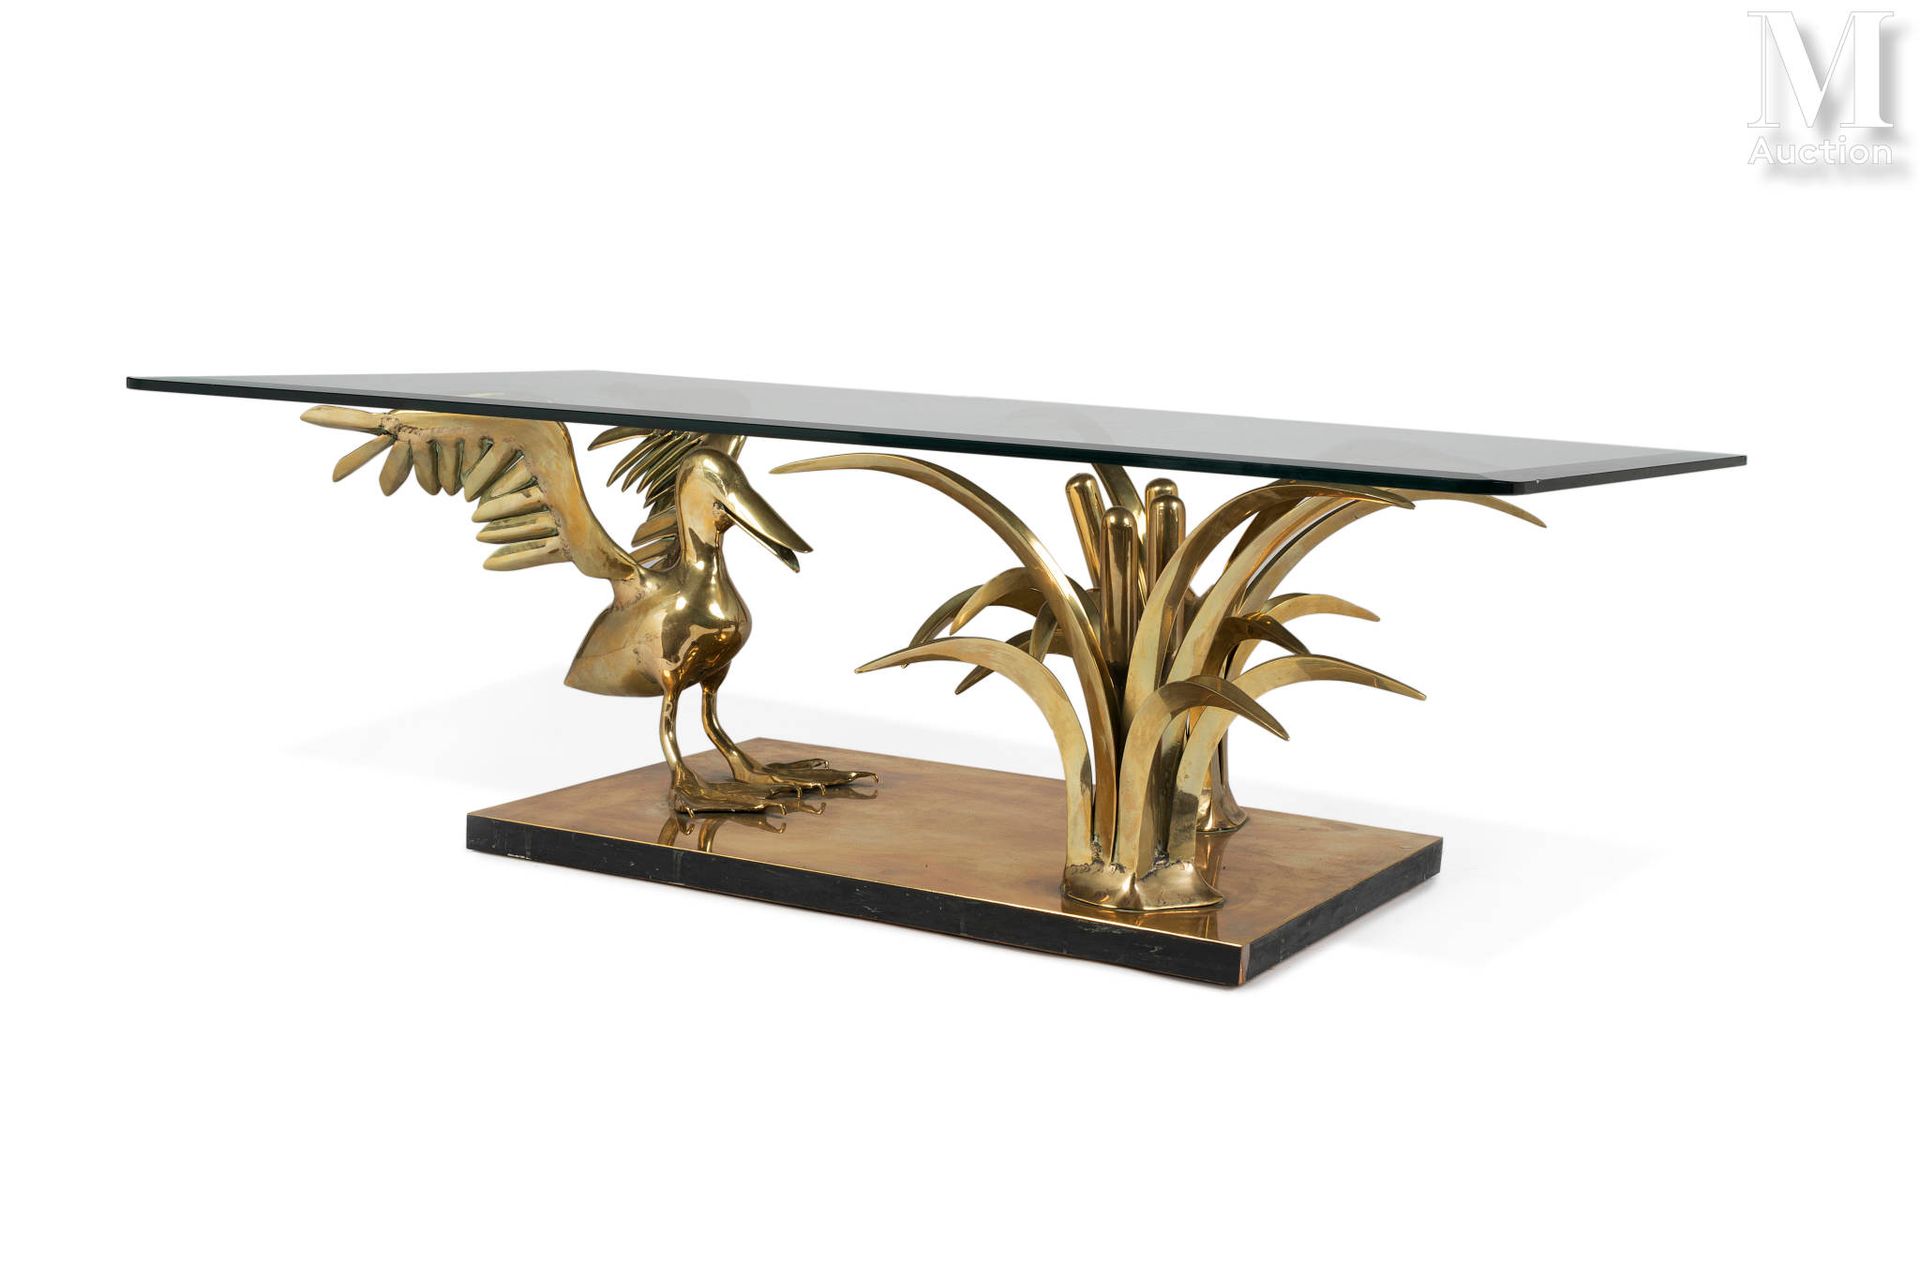 Null Christian TECHOUEYRES (XX - XXI)

Low table with brass and gilded bronze st&hellip;